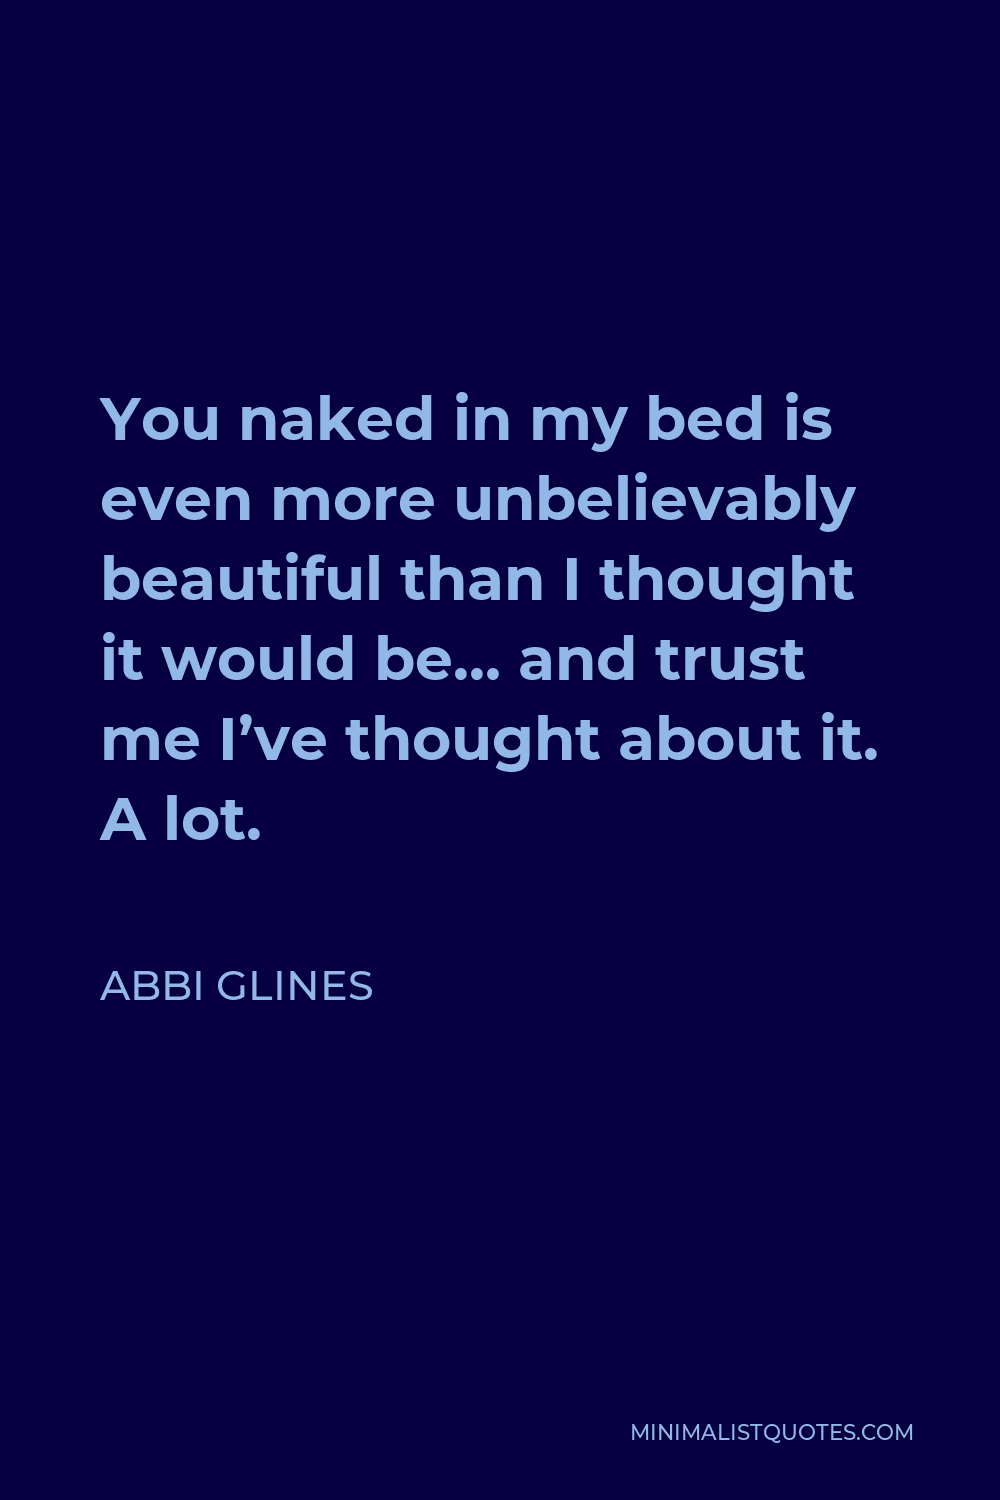 Abbi Glines Quote - You naked in my bed is even more unbelievably beautiful than I thought it would be… and trust me I’ve thought about it. A lot.